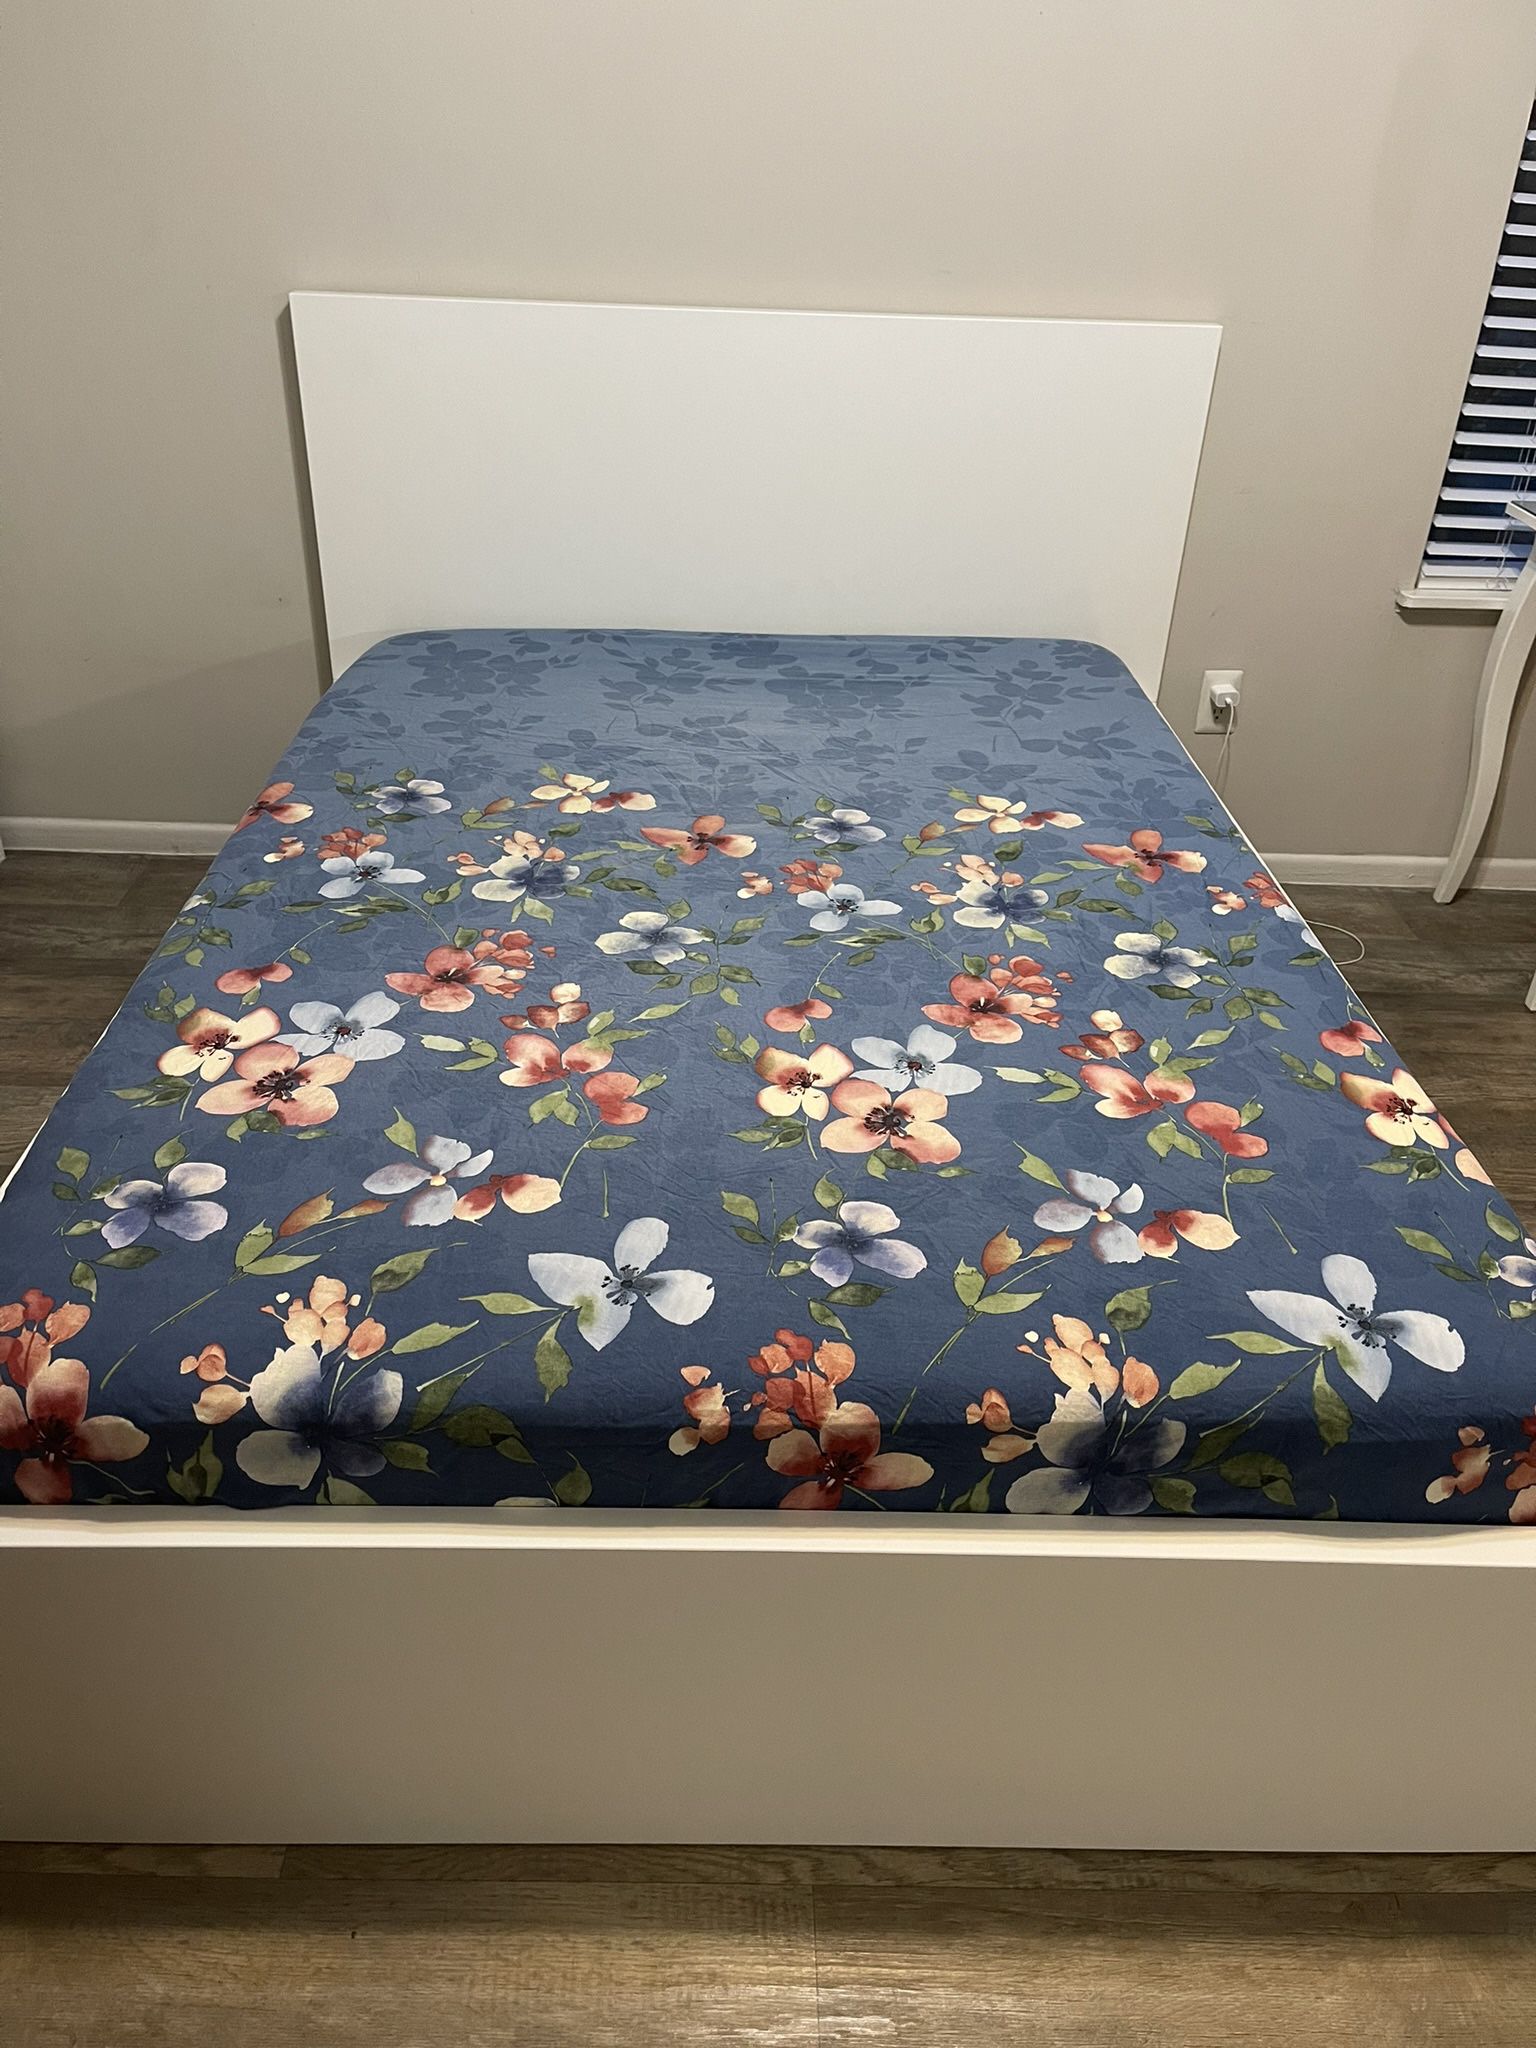 IKEA Queen Size Bed Frame